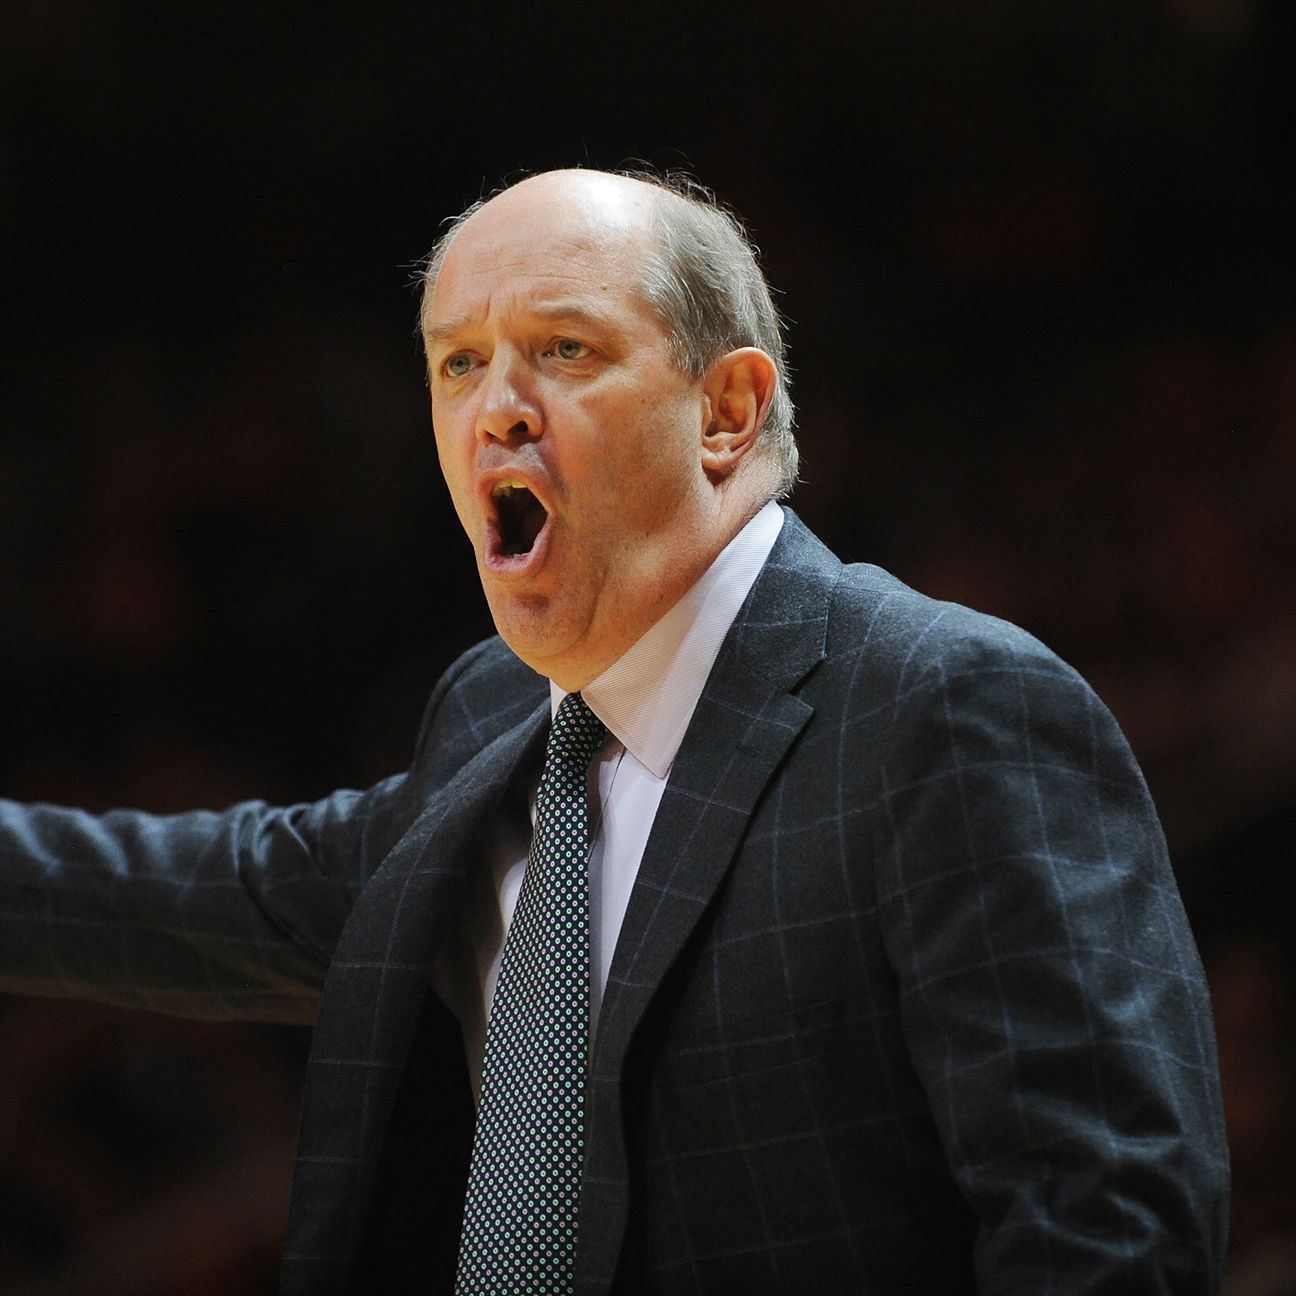 Vanderbilt head coach Kevin Stallings apologizes for berating player after Tennessee game1296 x 1296